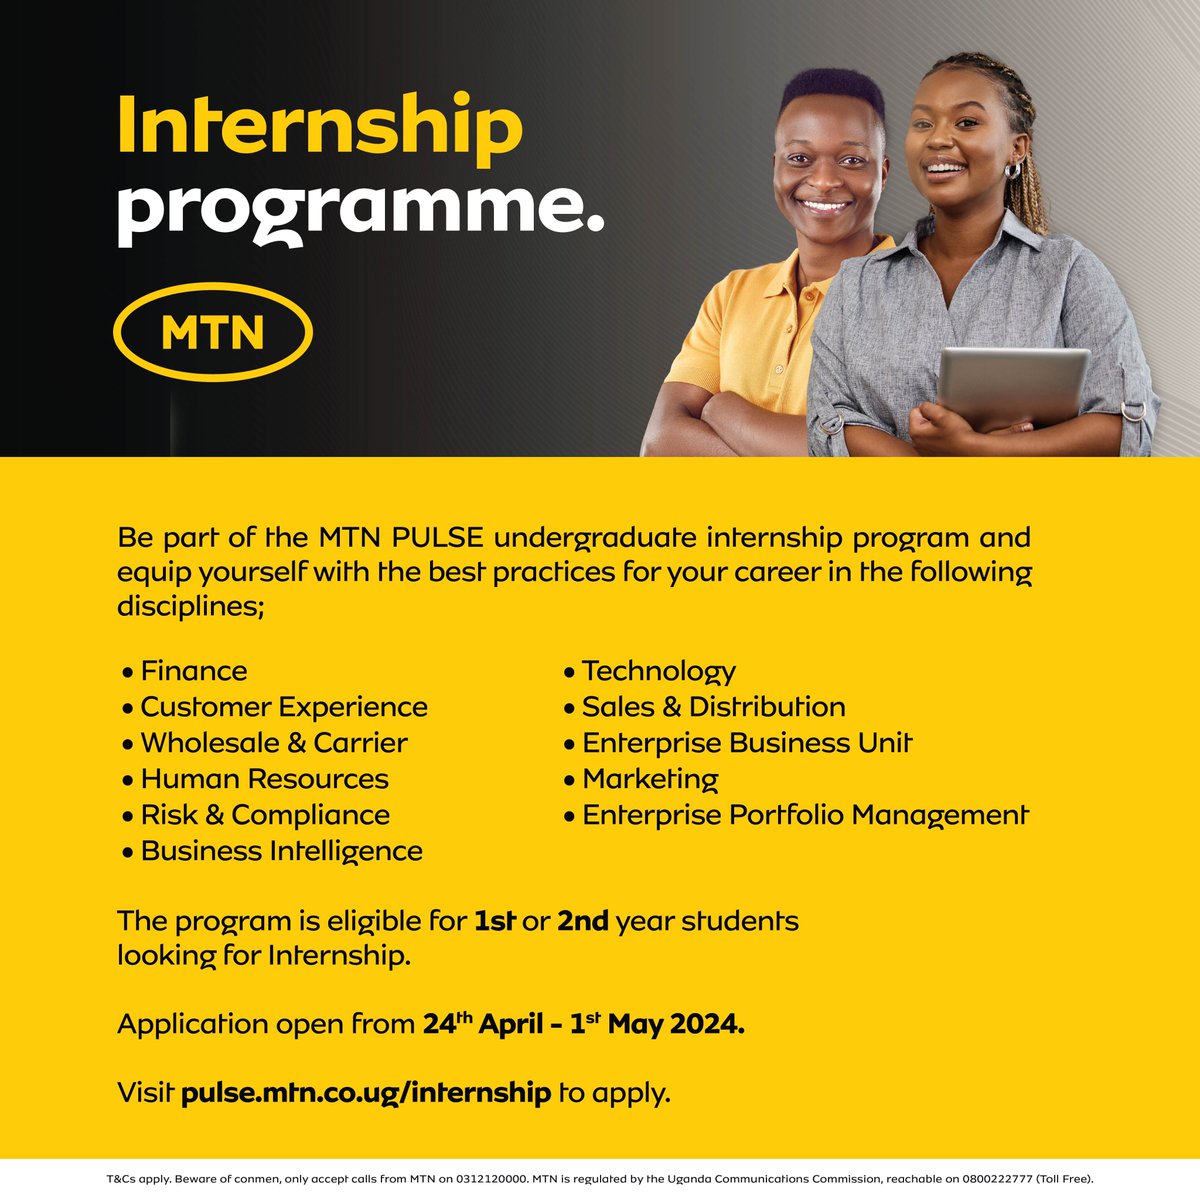 Are you in 1st & 2nd year at Uni?   Apply for the #MTNPulse internship program & gain valuable experience in various fields like finance, technology, customer service & more. Apply now through May 1st: pulse.mtn.co.ug/internship/ #MTNPulse #Internship #Uganda